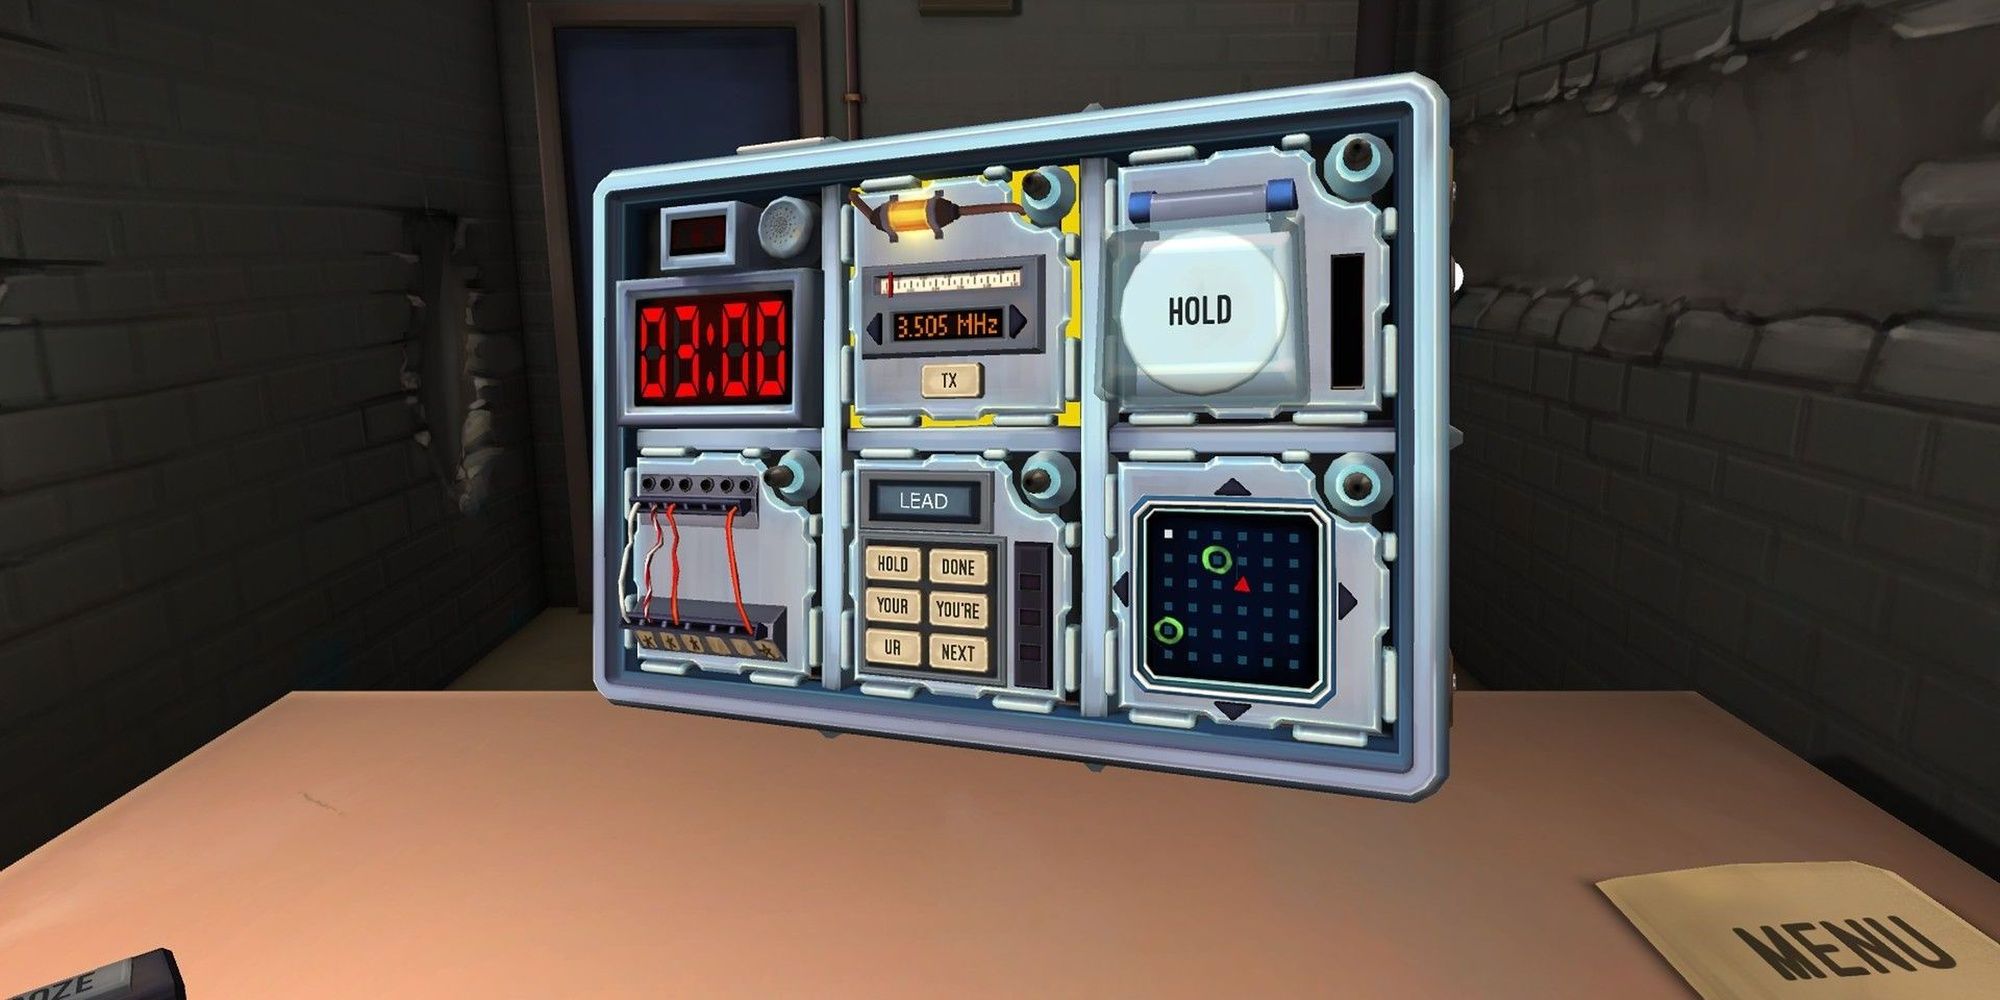 Keep Talking And Nobody Explodes: The Dials, Buttons And Gadgets On The Explosive Bomb